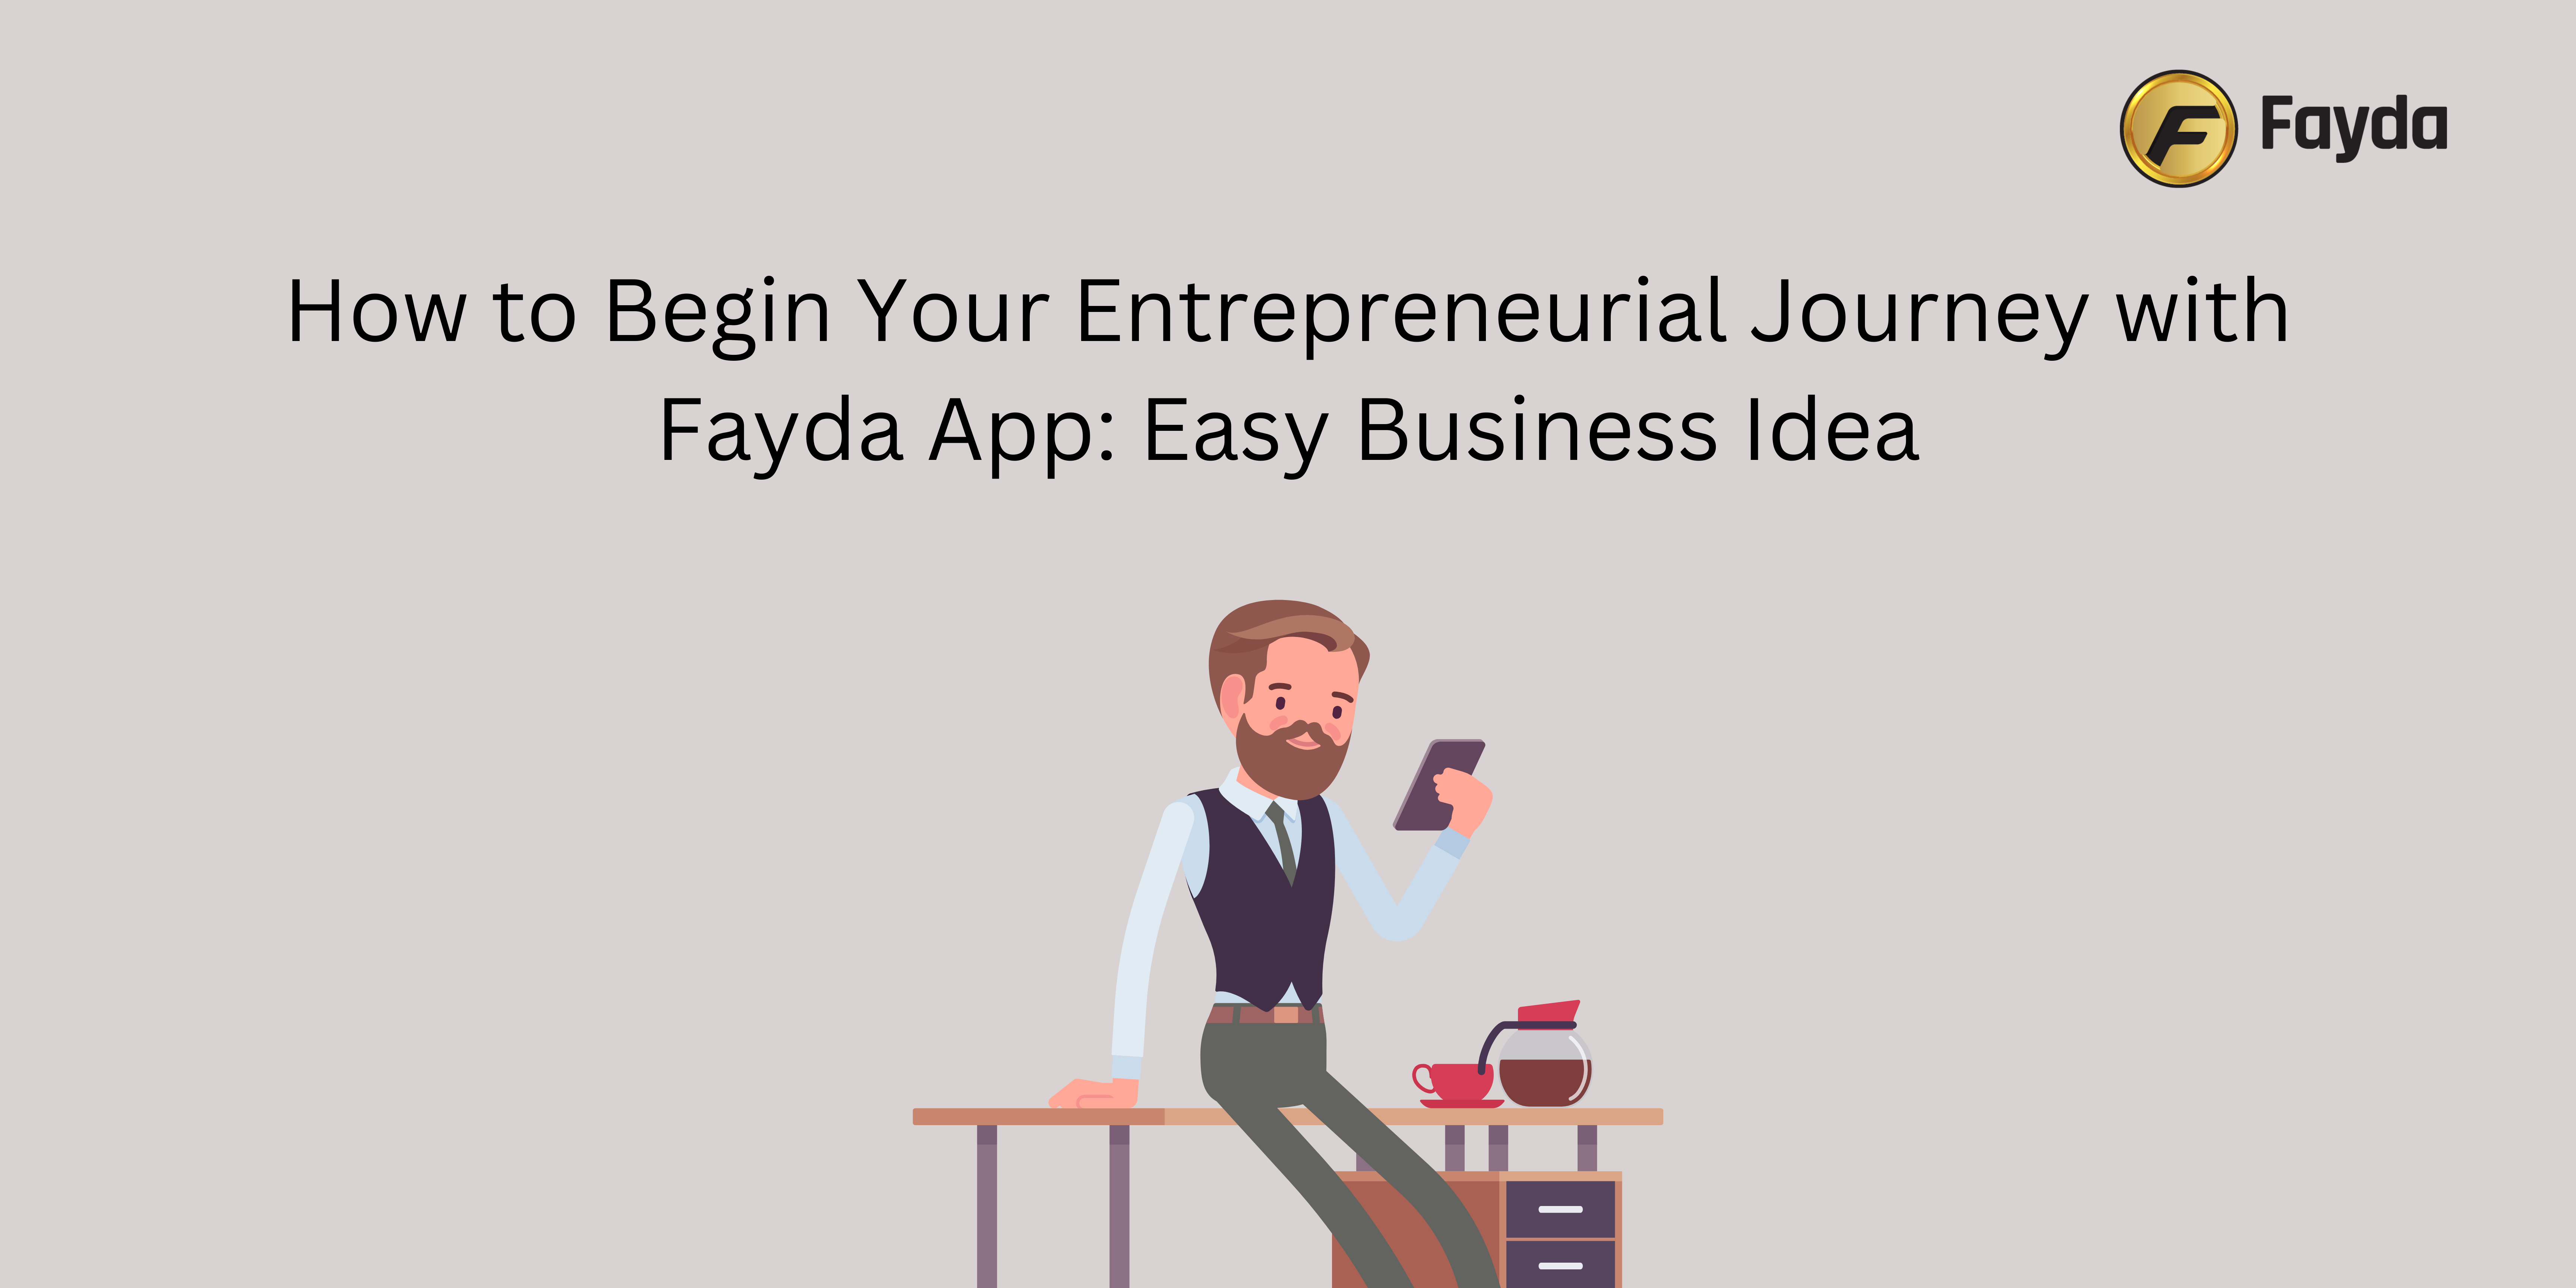 How to Begin Your Entrepreneurial Journey with Fayda App: Easy Business Idea